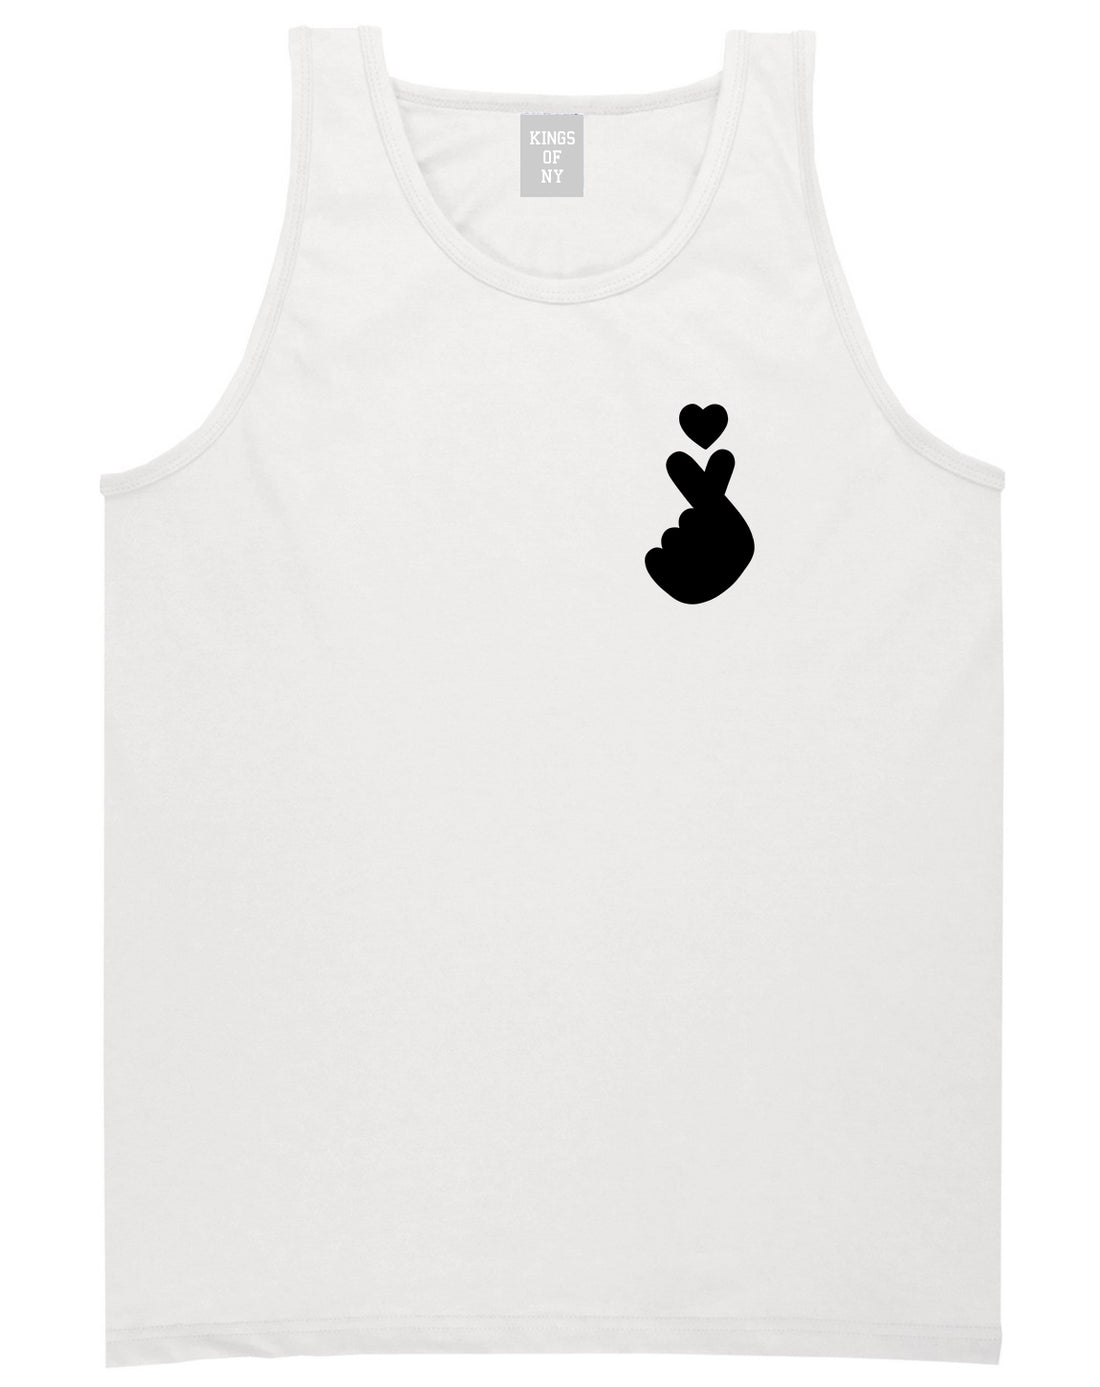 Finger Heart Emoji Chest Mens White Tank Top Shirt by KINGS OF NY